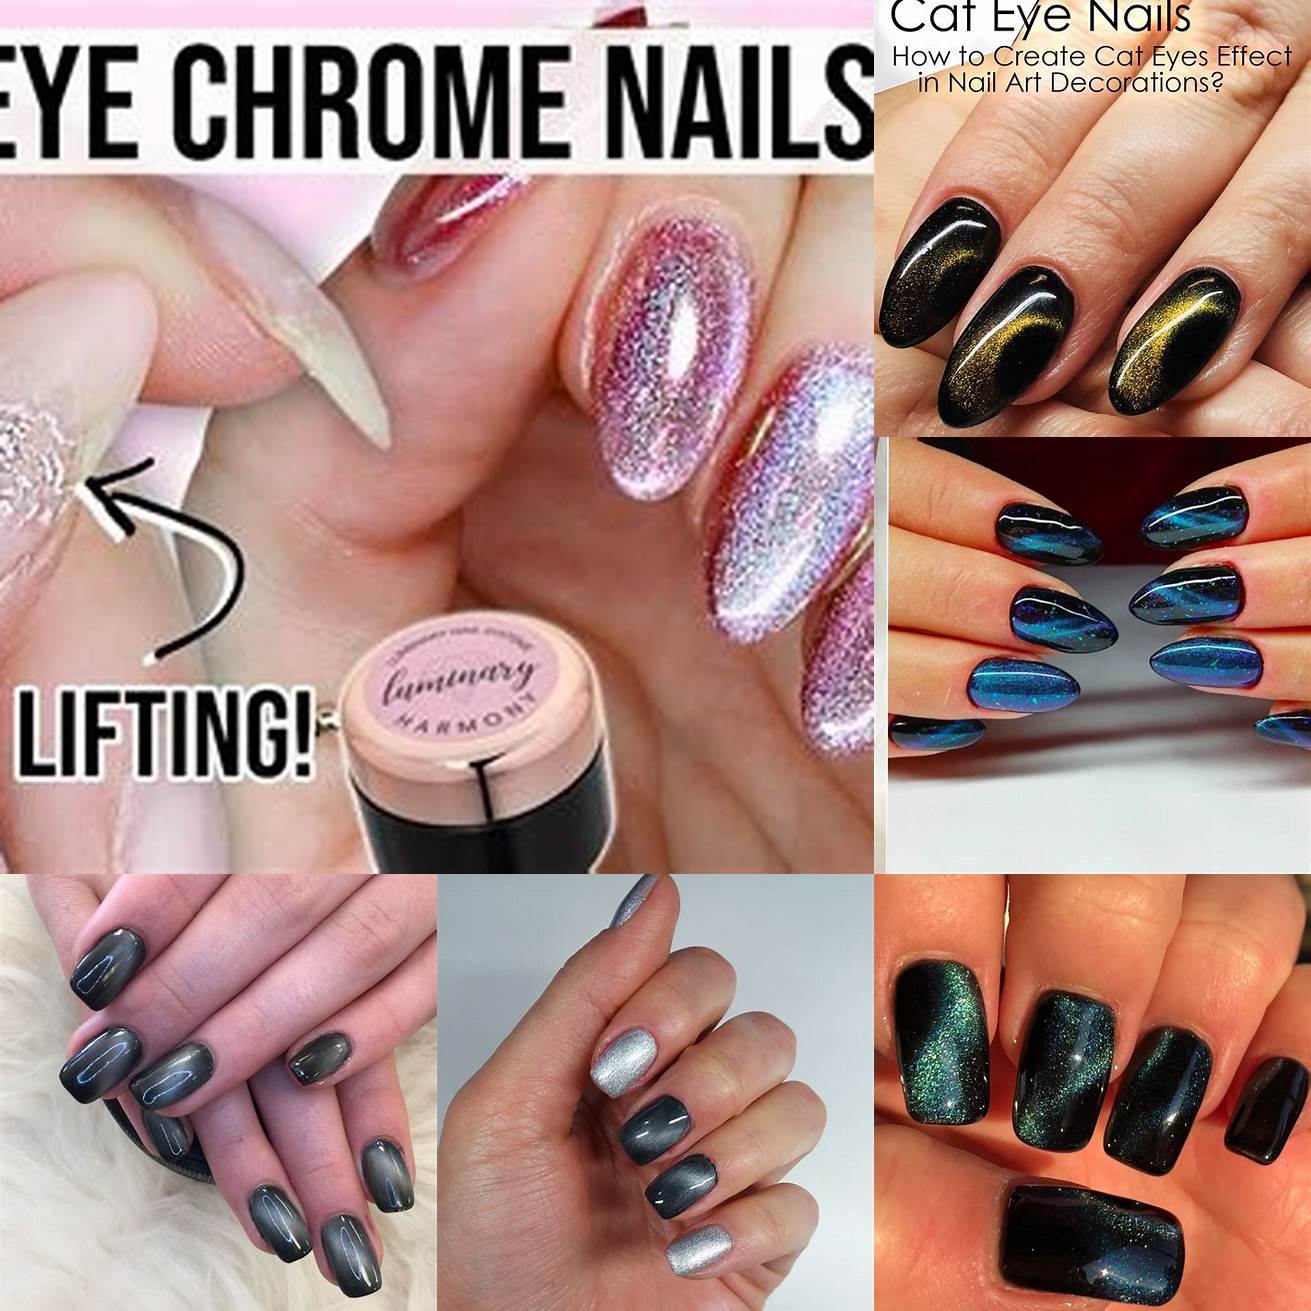 Step 2 Apply a coat of Cat Eye Nail Polish to your nails and let it dry for a few seconds